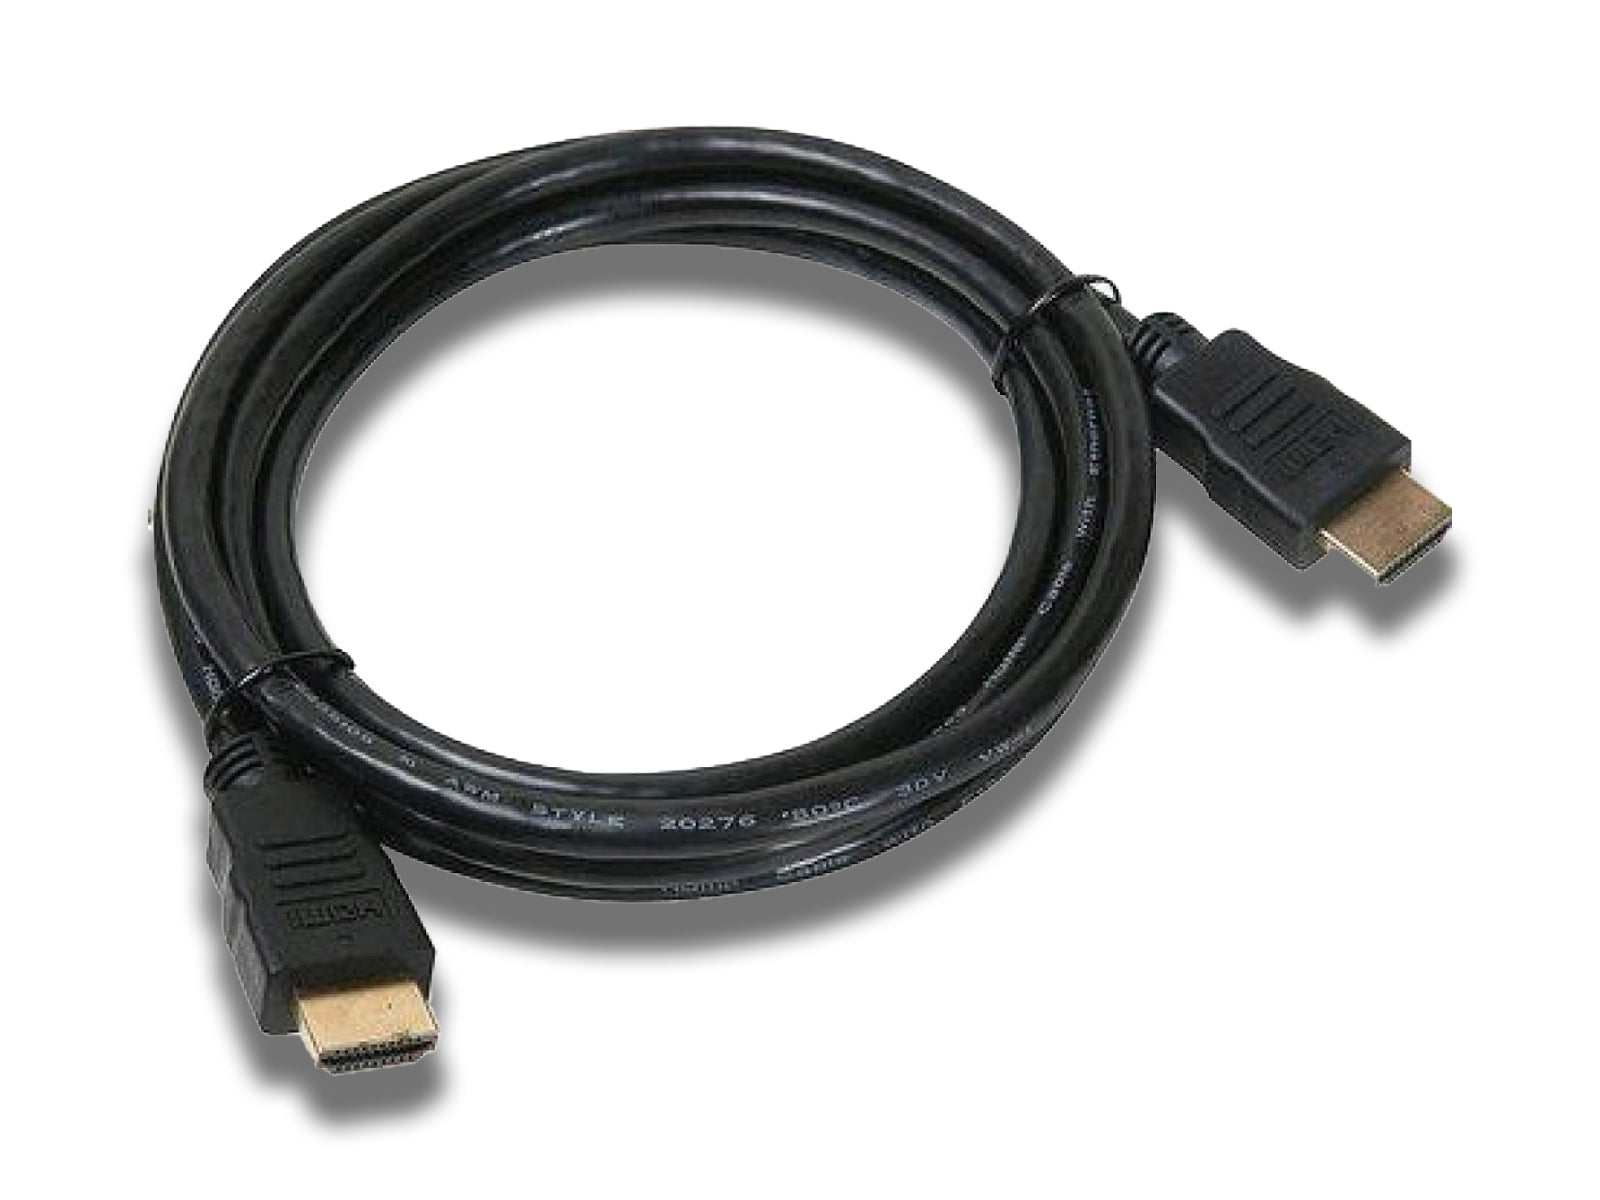 HDMI To Mini Male Cable Rolled Up